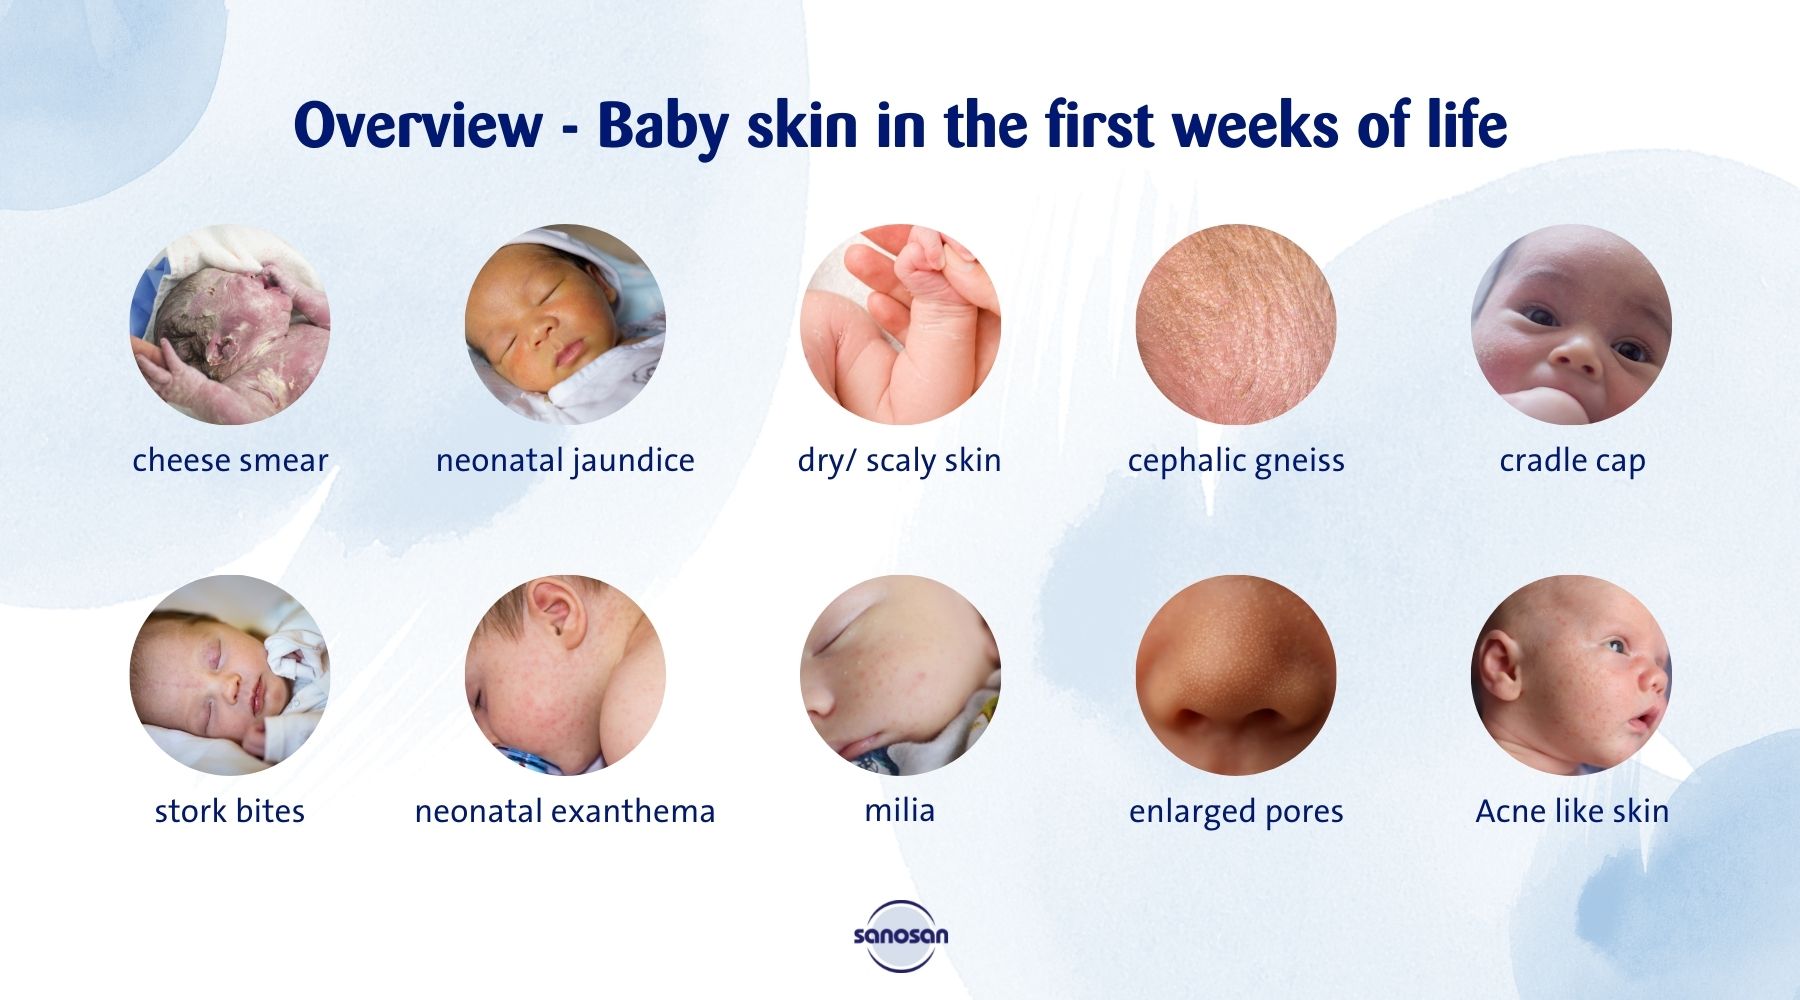 Baby skin in first weeks of life - sanosan